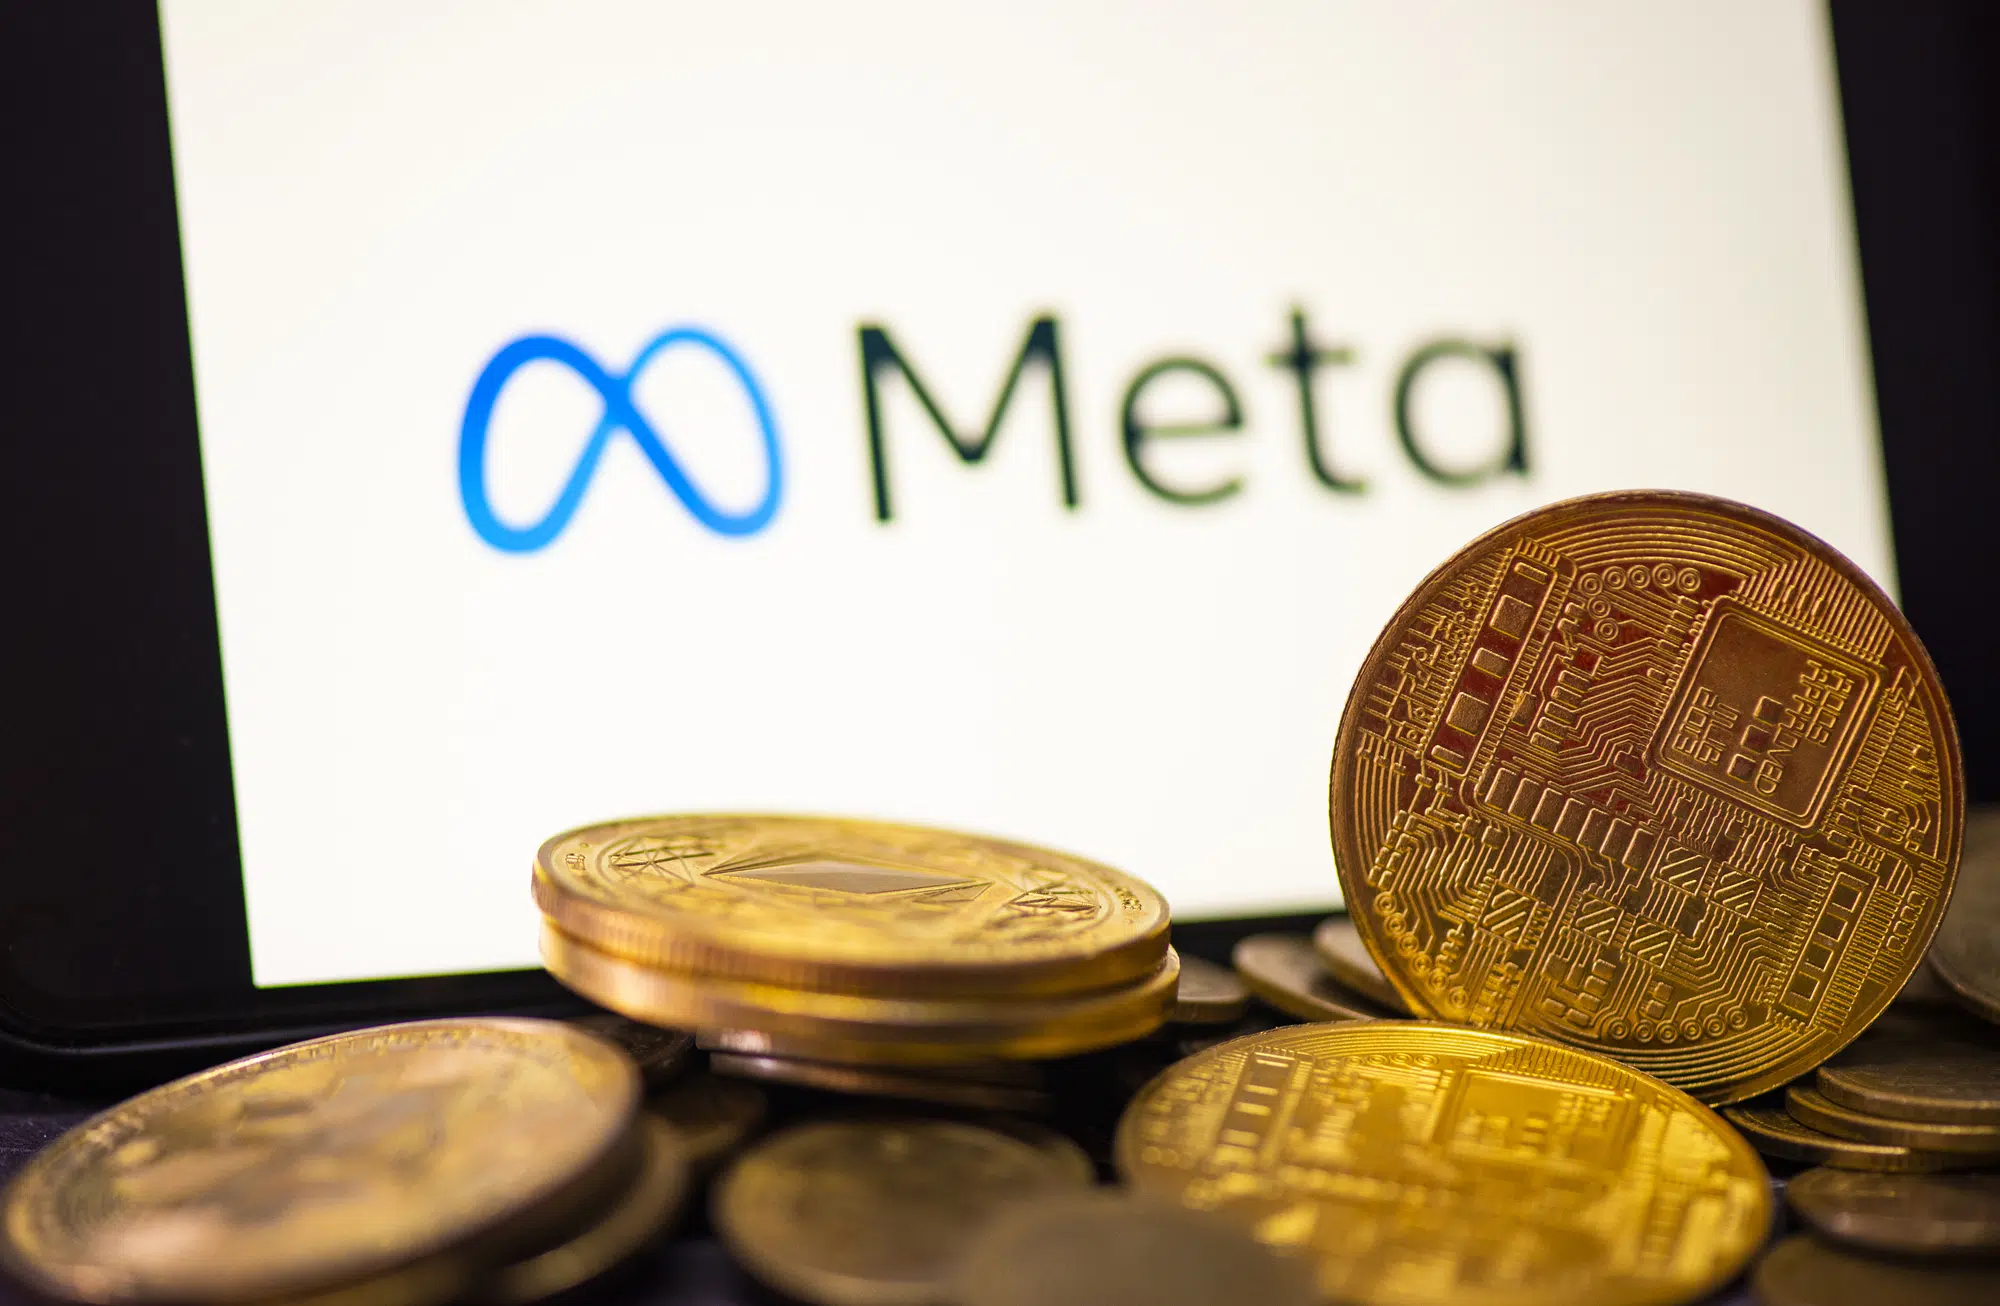 Metaverse coin crypto currency blockchain concept, META on smart